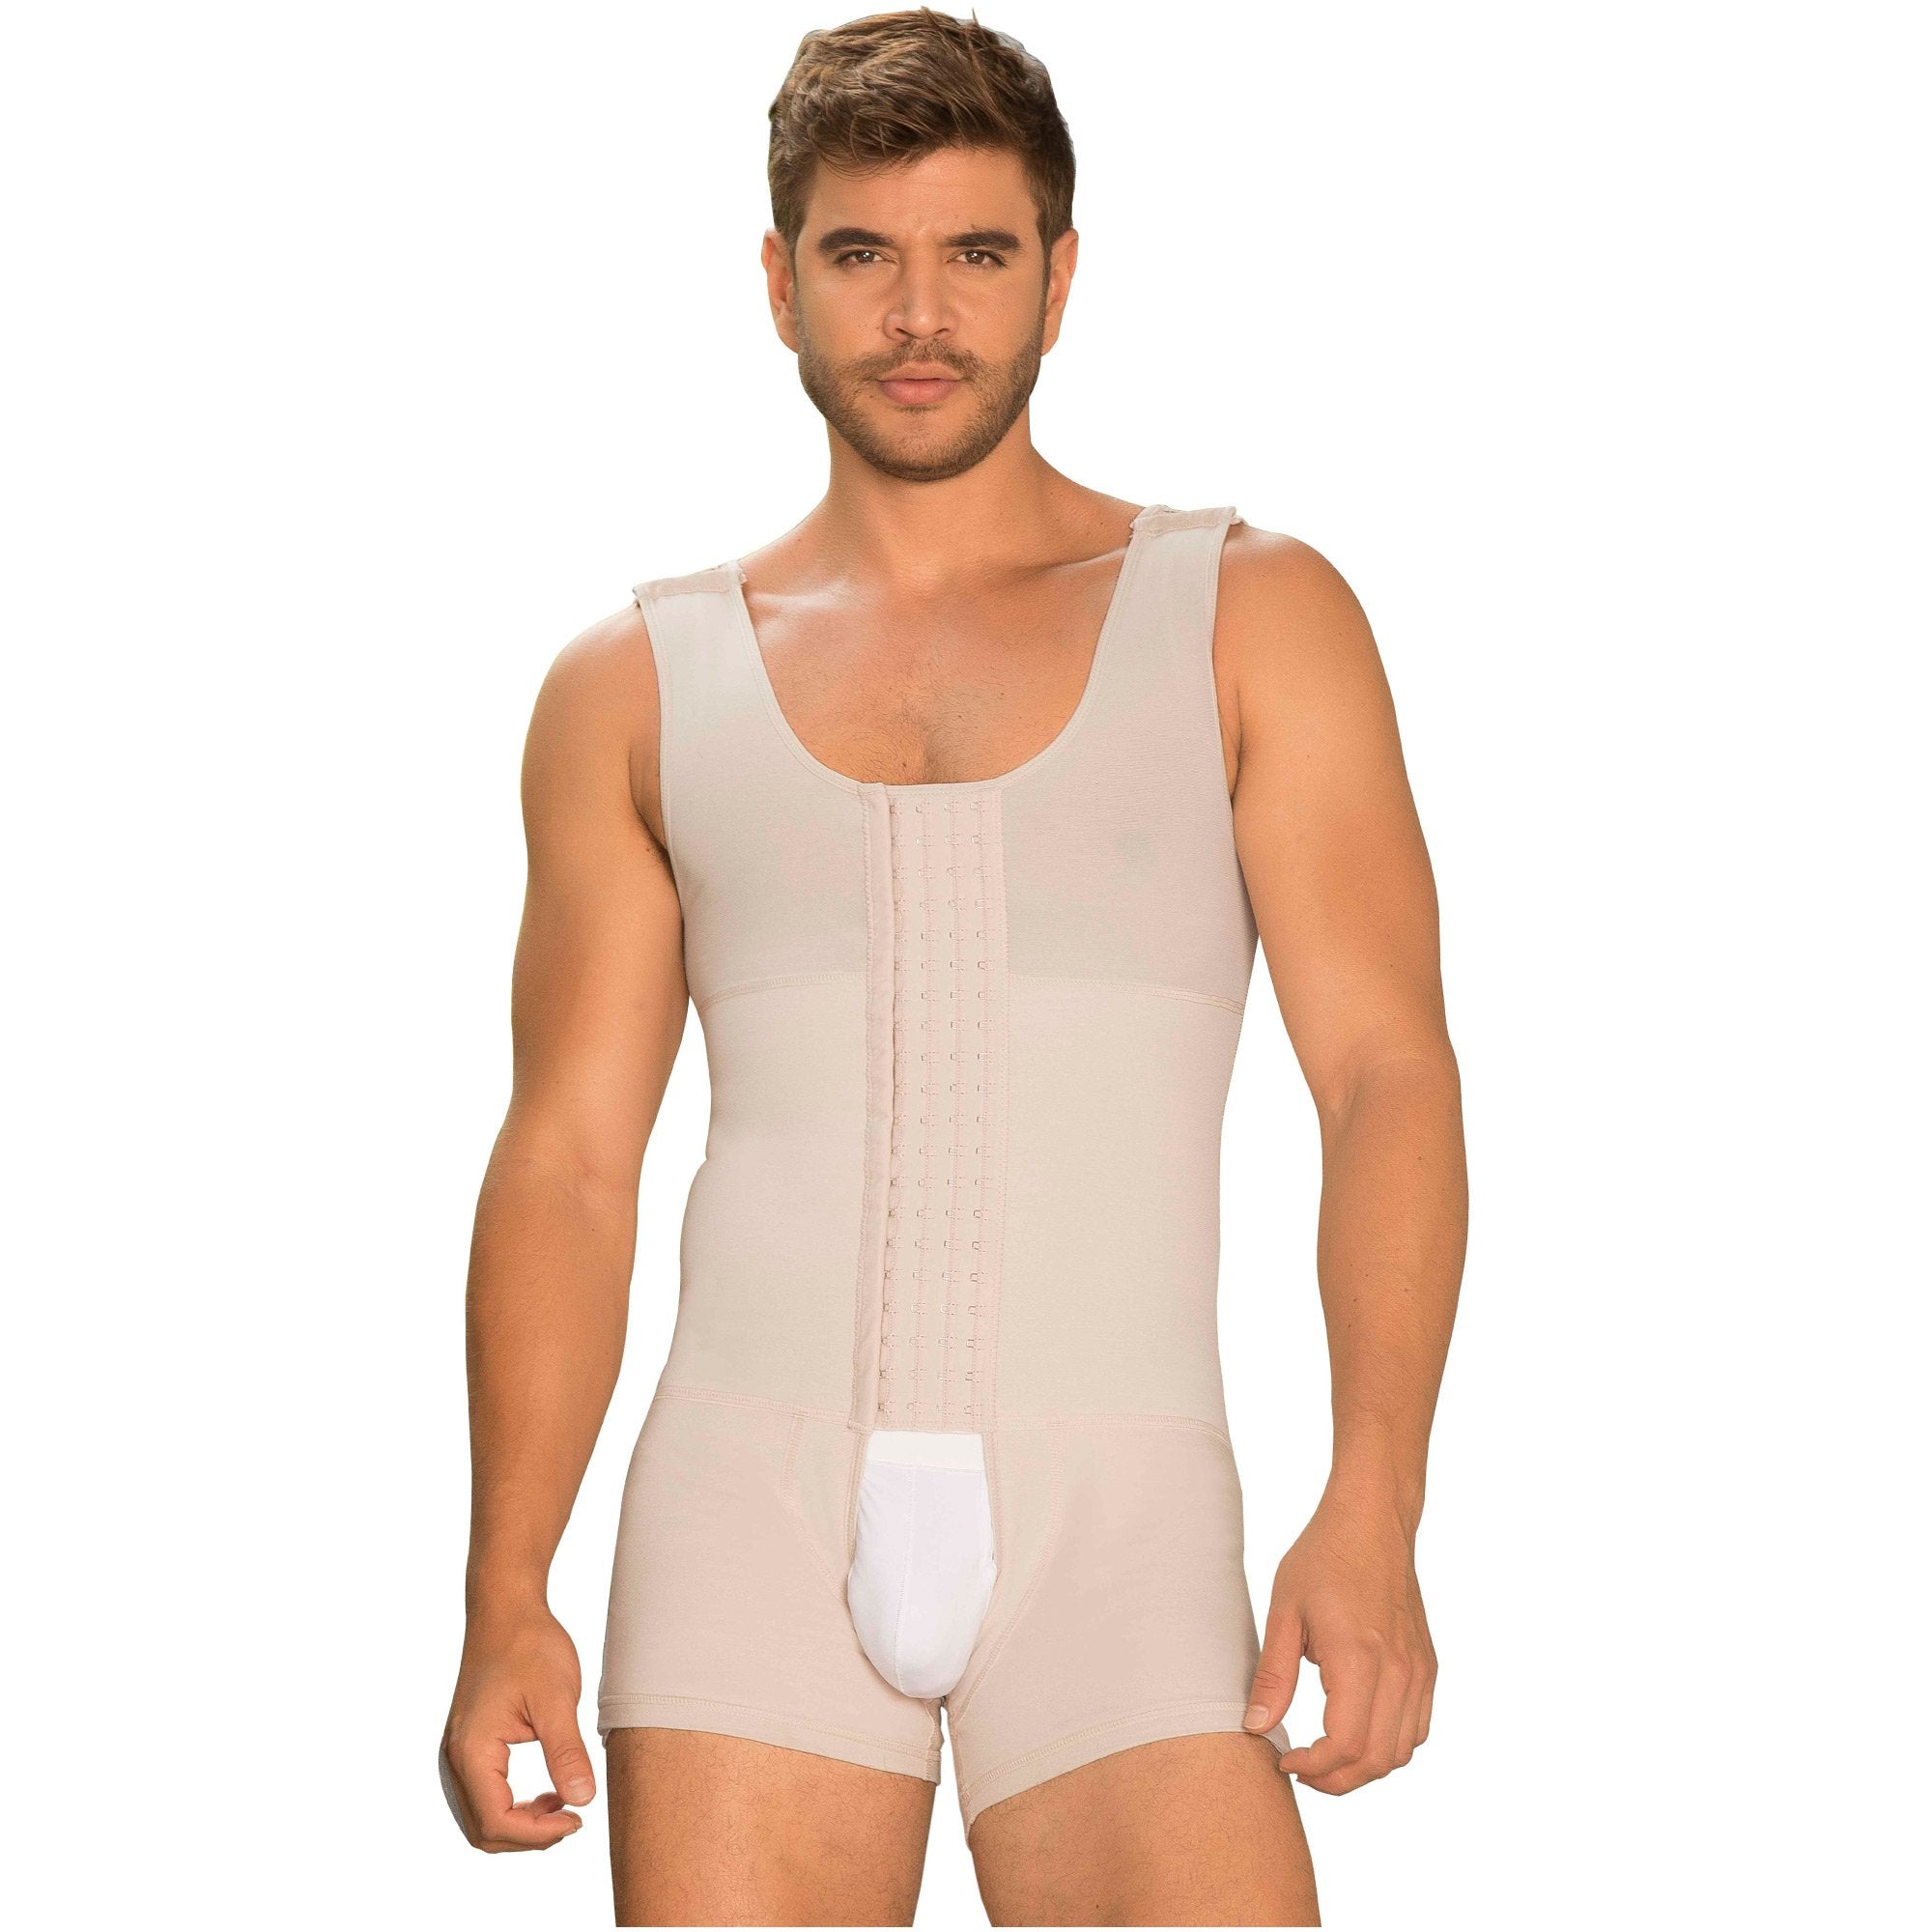 Stage 2 Colombianas Full Body Shapewear: Compression and Body Shaping